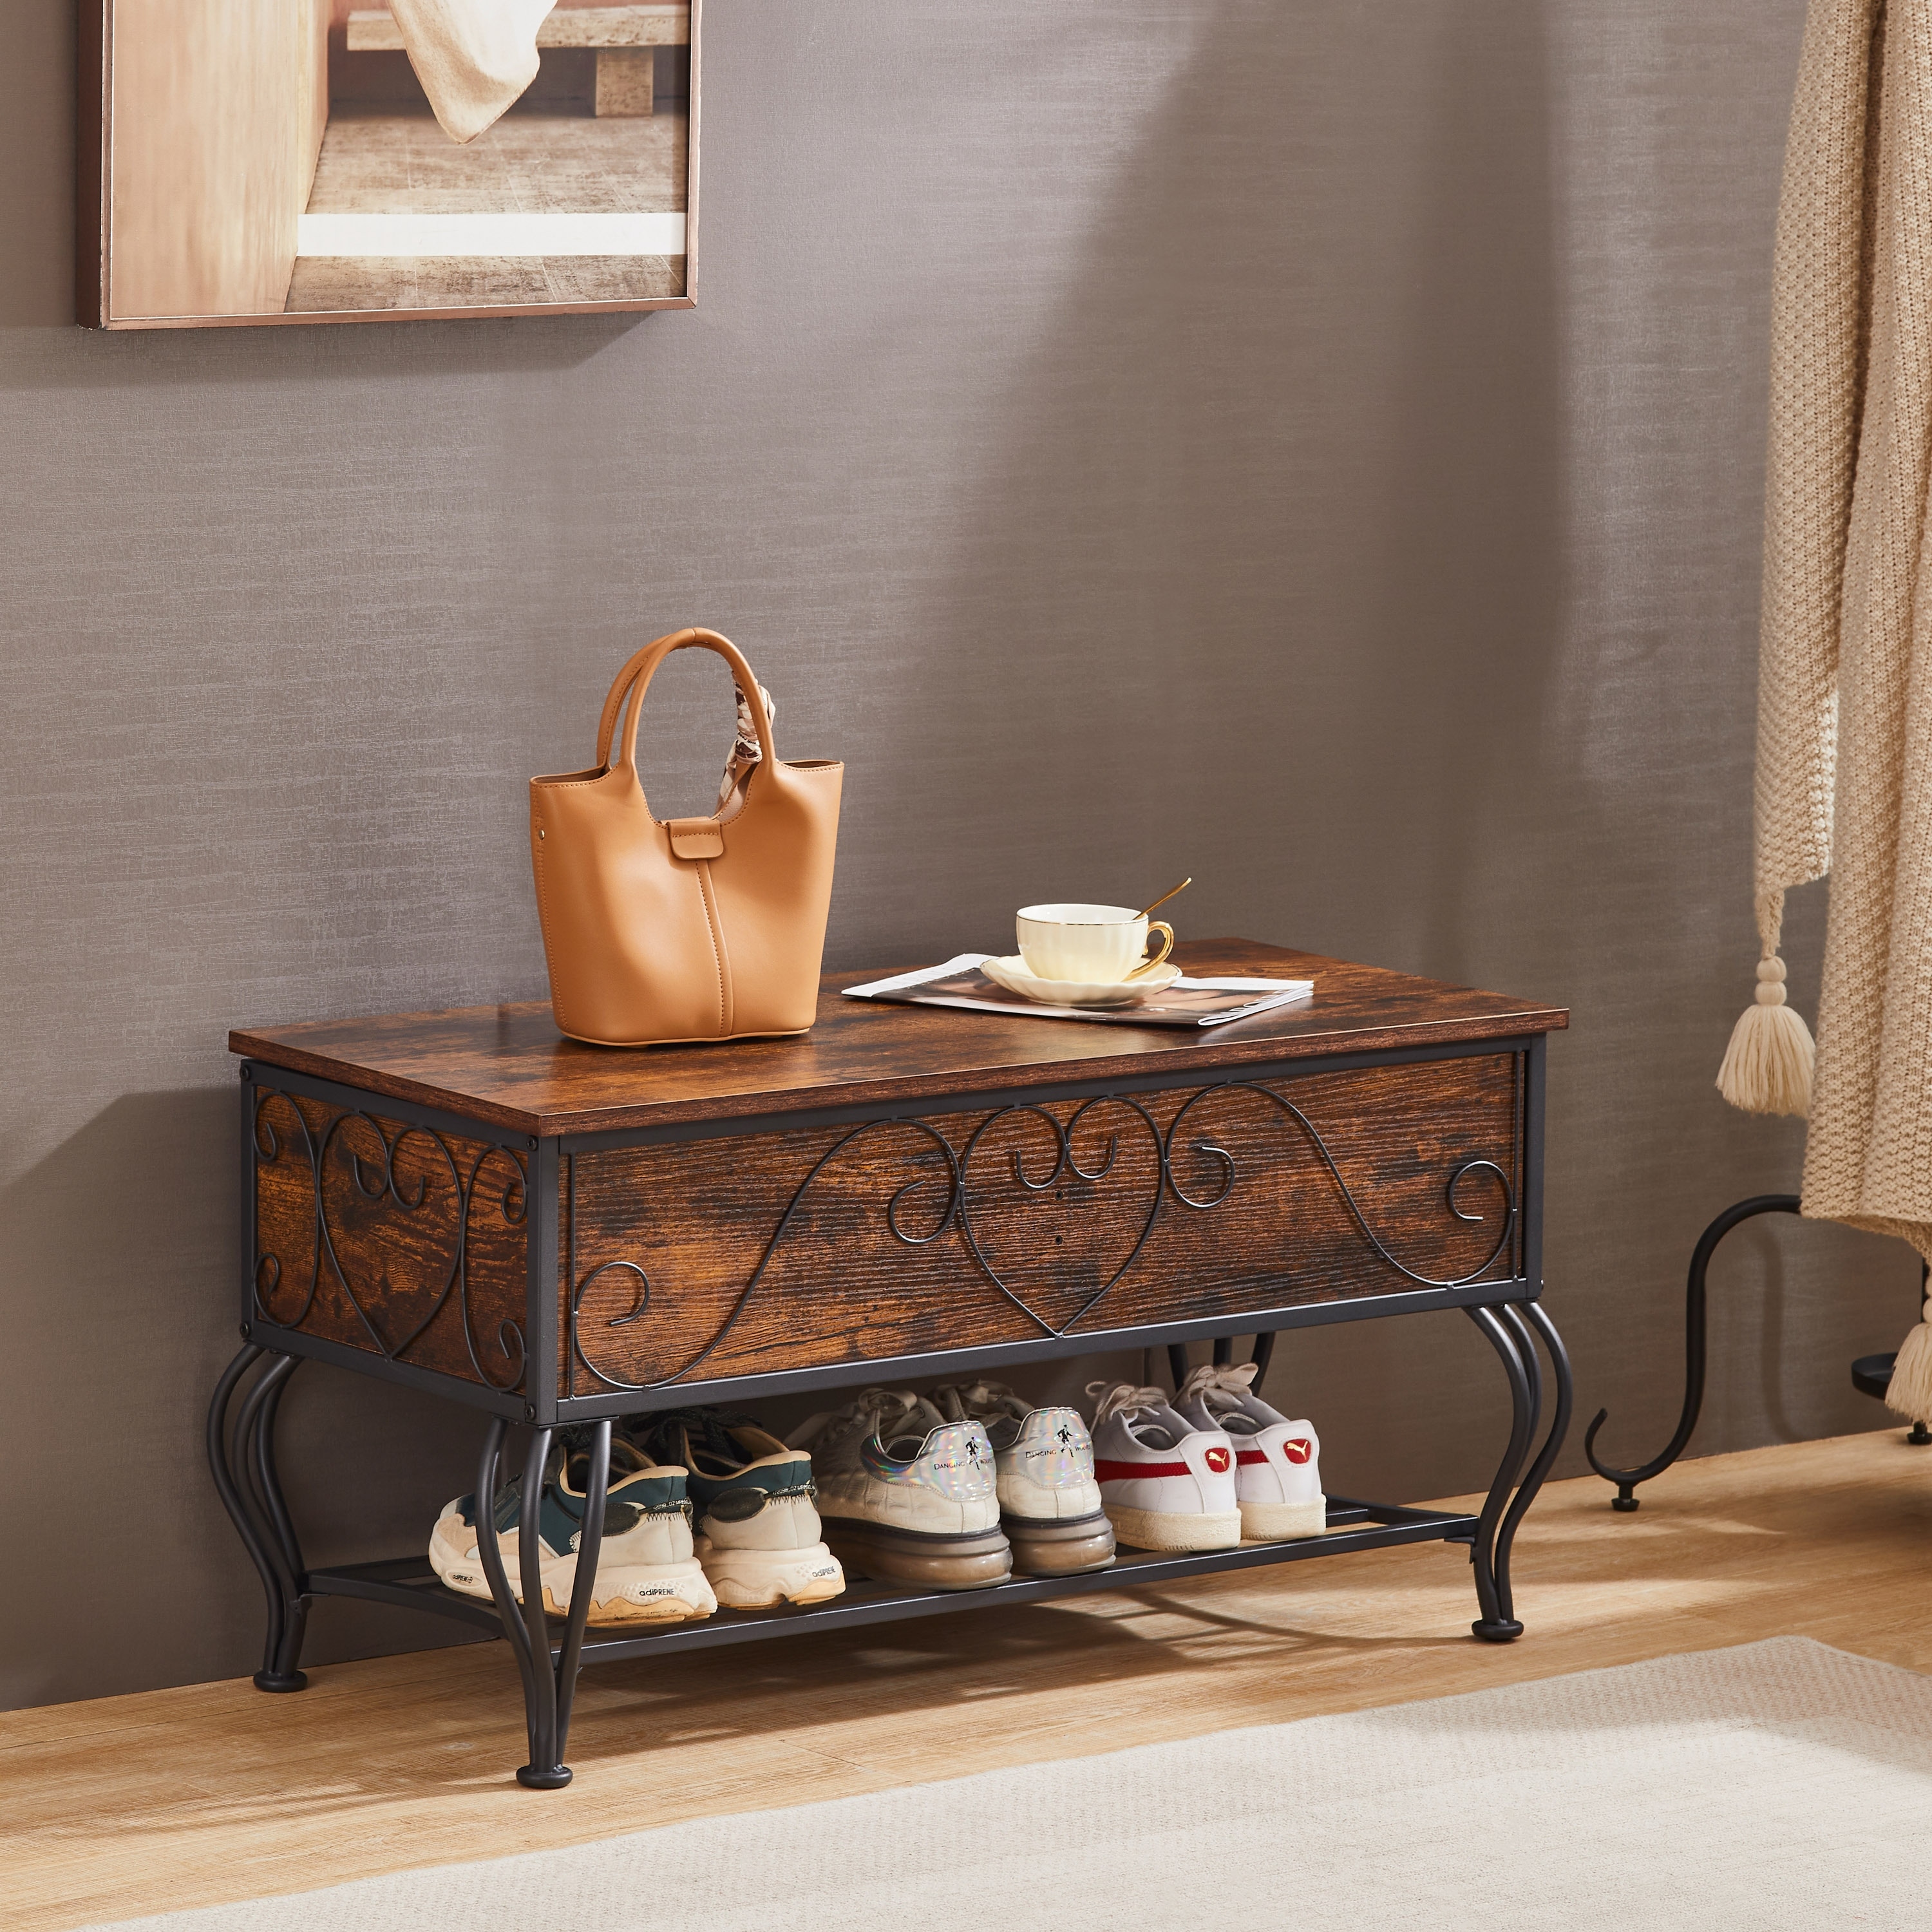 https://ak1.ostkcdn.com/images/products/is/images/direct/915e87a4c927e22bf08c25014cb55065ea4e7c83/Shoe-Rack-Bench-for-Entryway%2C-Industrial-Bench-with-Shoe-Storage-Shelf%2C-Rustic-Shoe-Rack-for-Small-Spaces.jpg